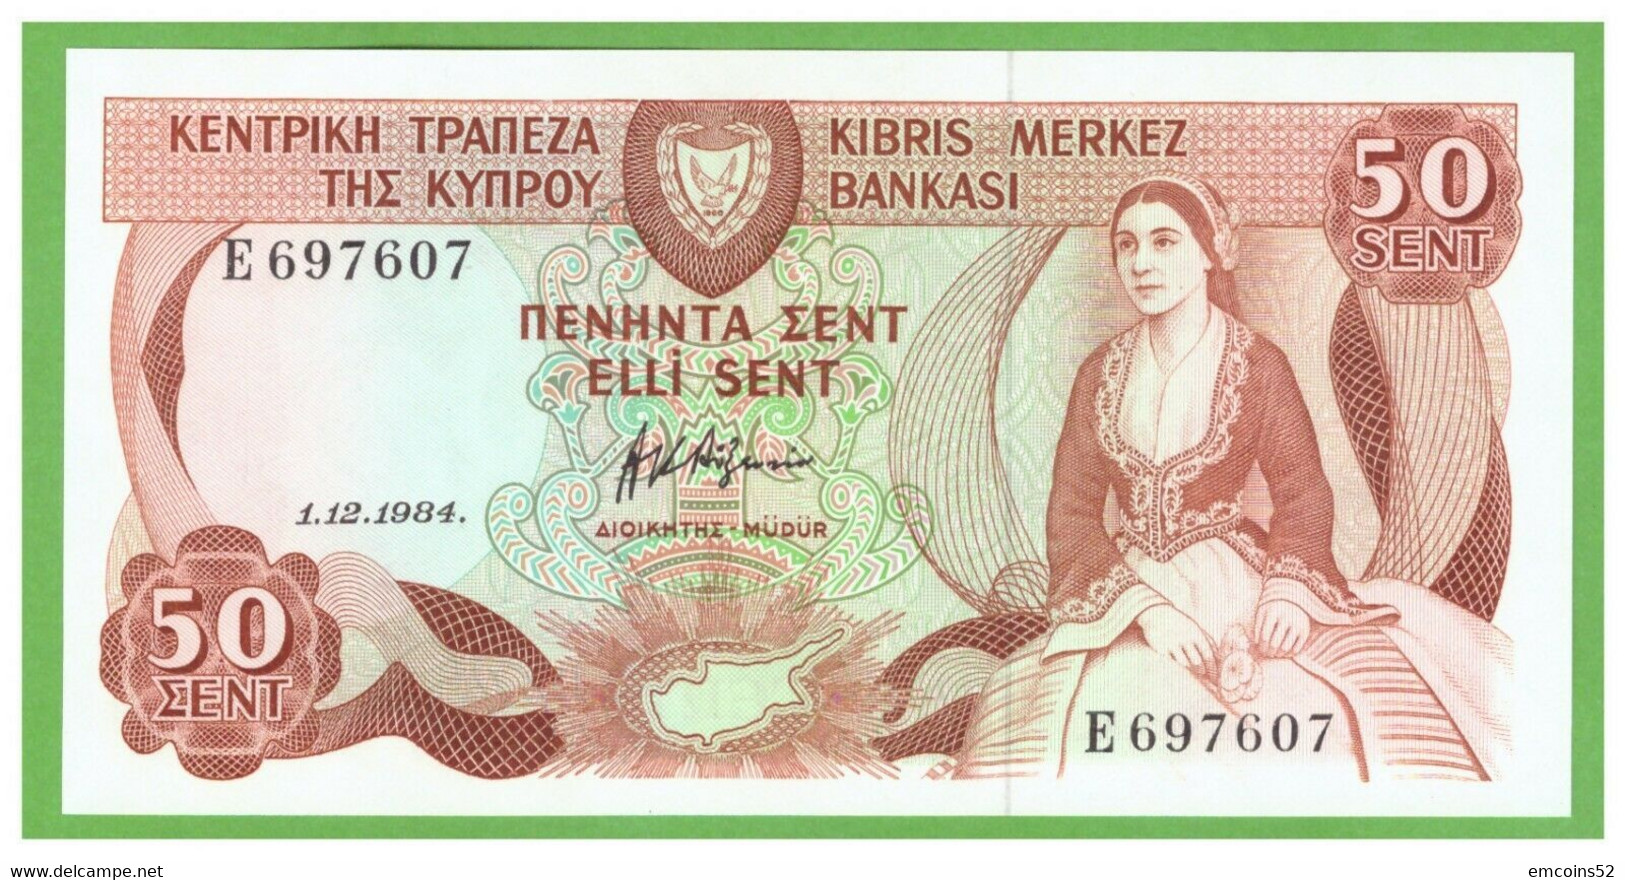 CYPRUS 50 CENTS 1984  P-49a2 UNC - Cyprus